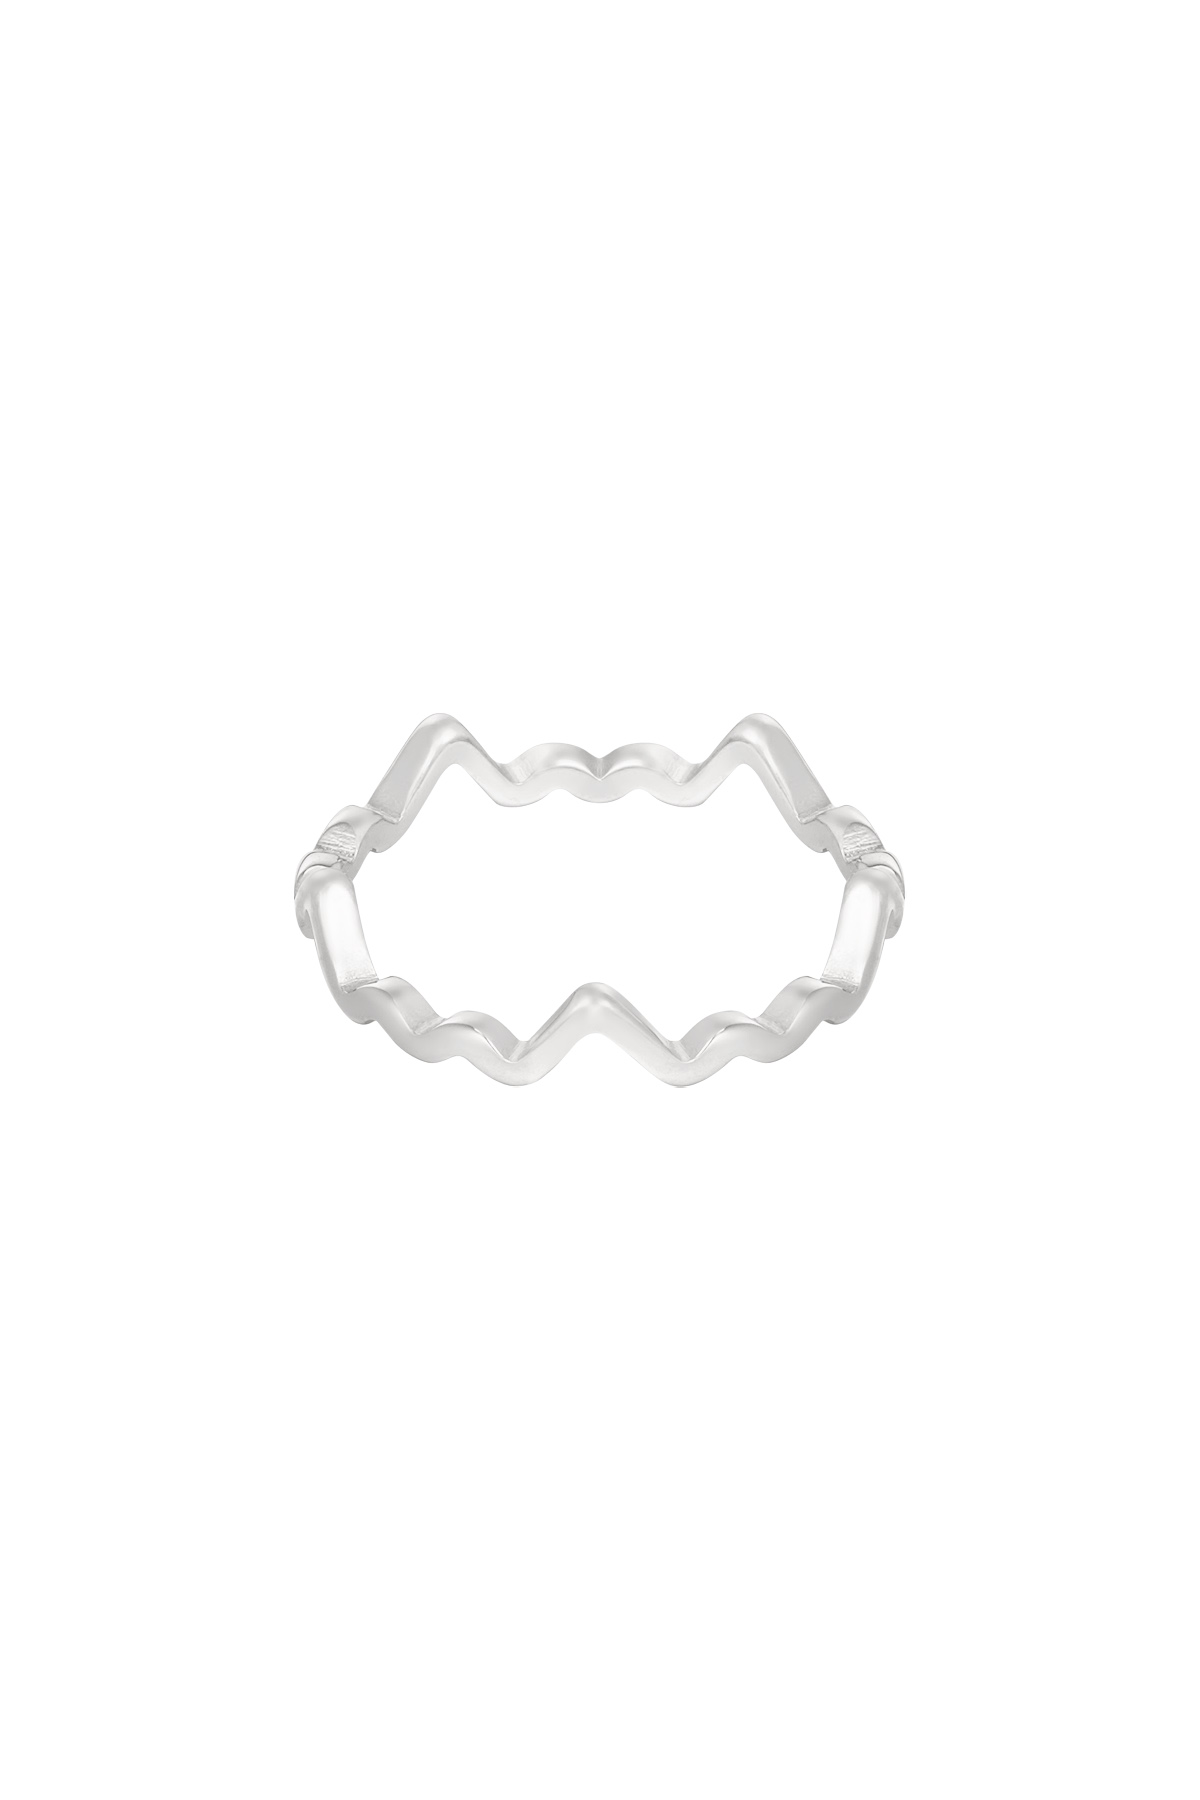 Ring aesthetic - silver h5 